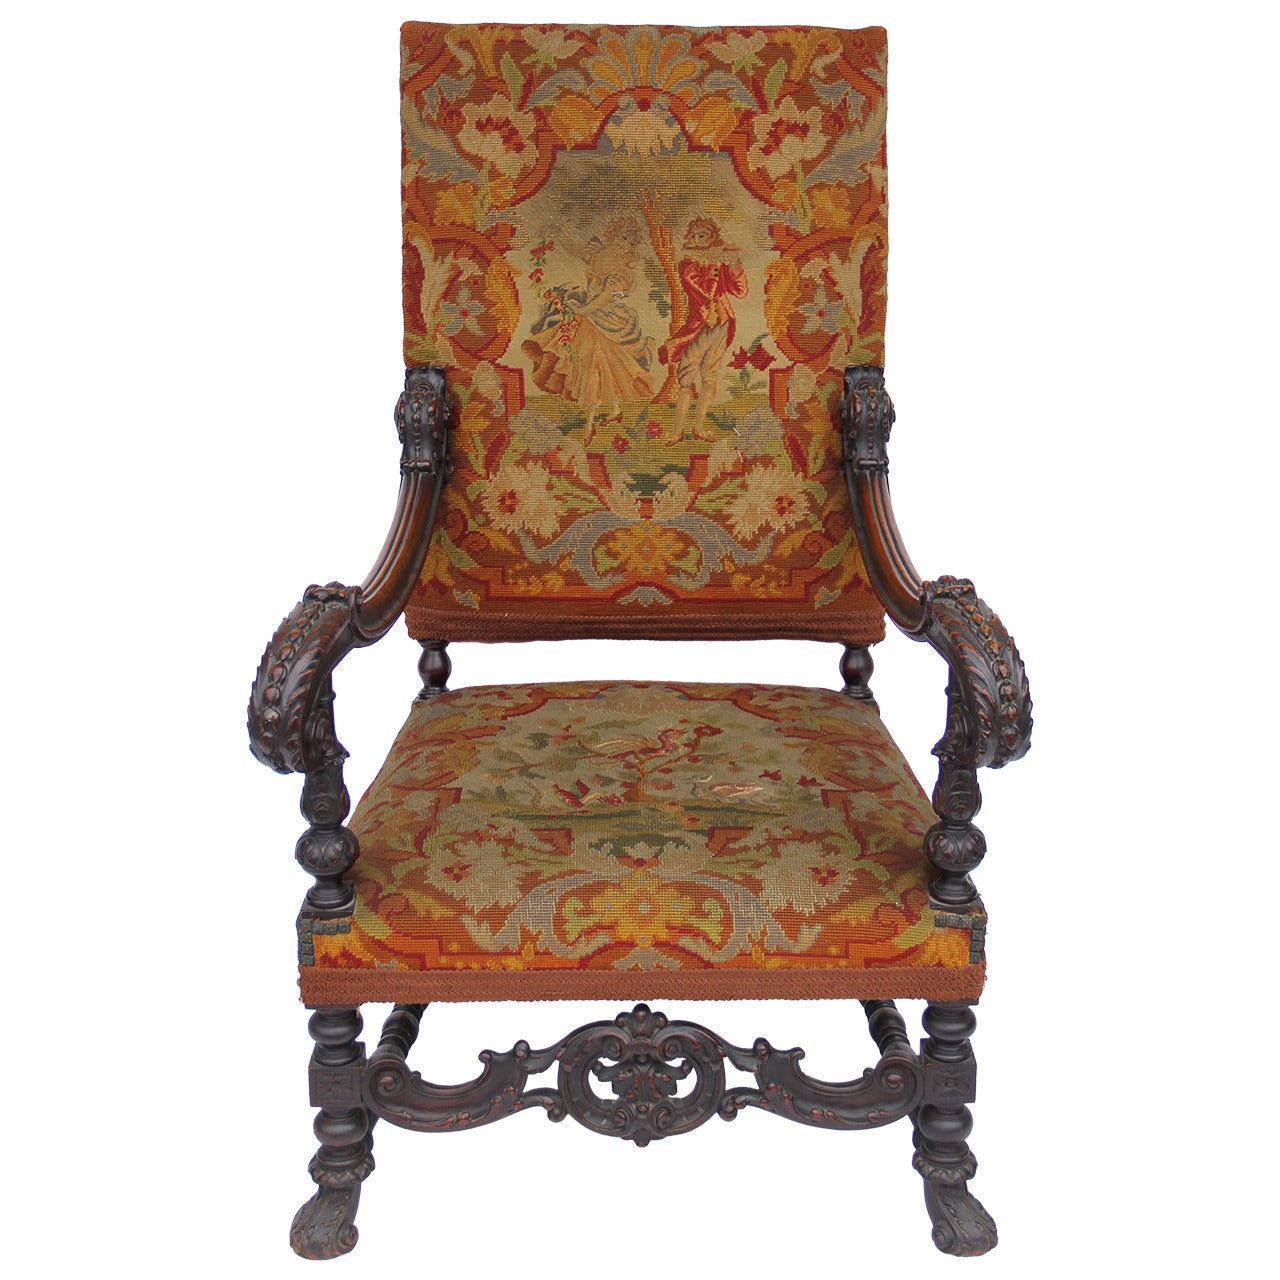 Antique Louis XIV Style Carved Fauteuil High-Back Armchair with Needlepoint